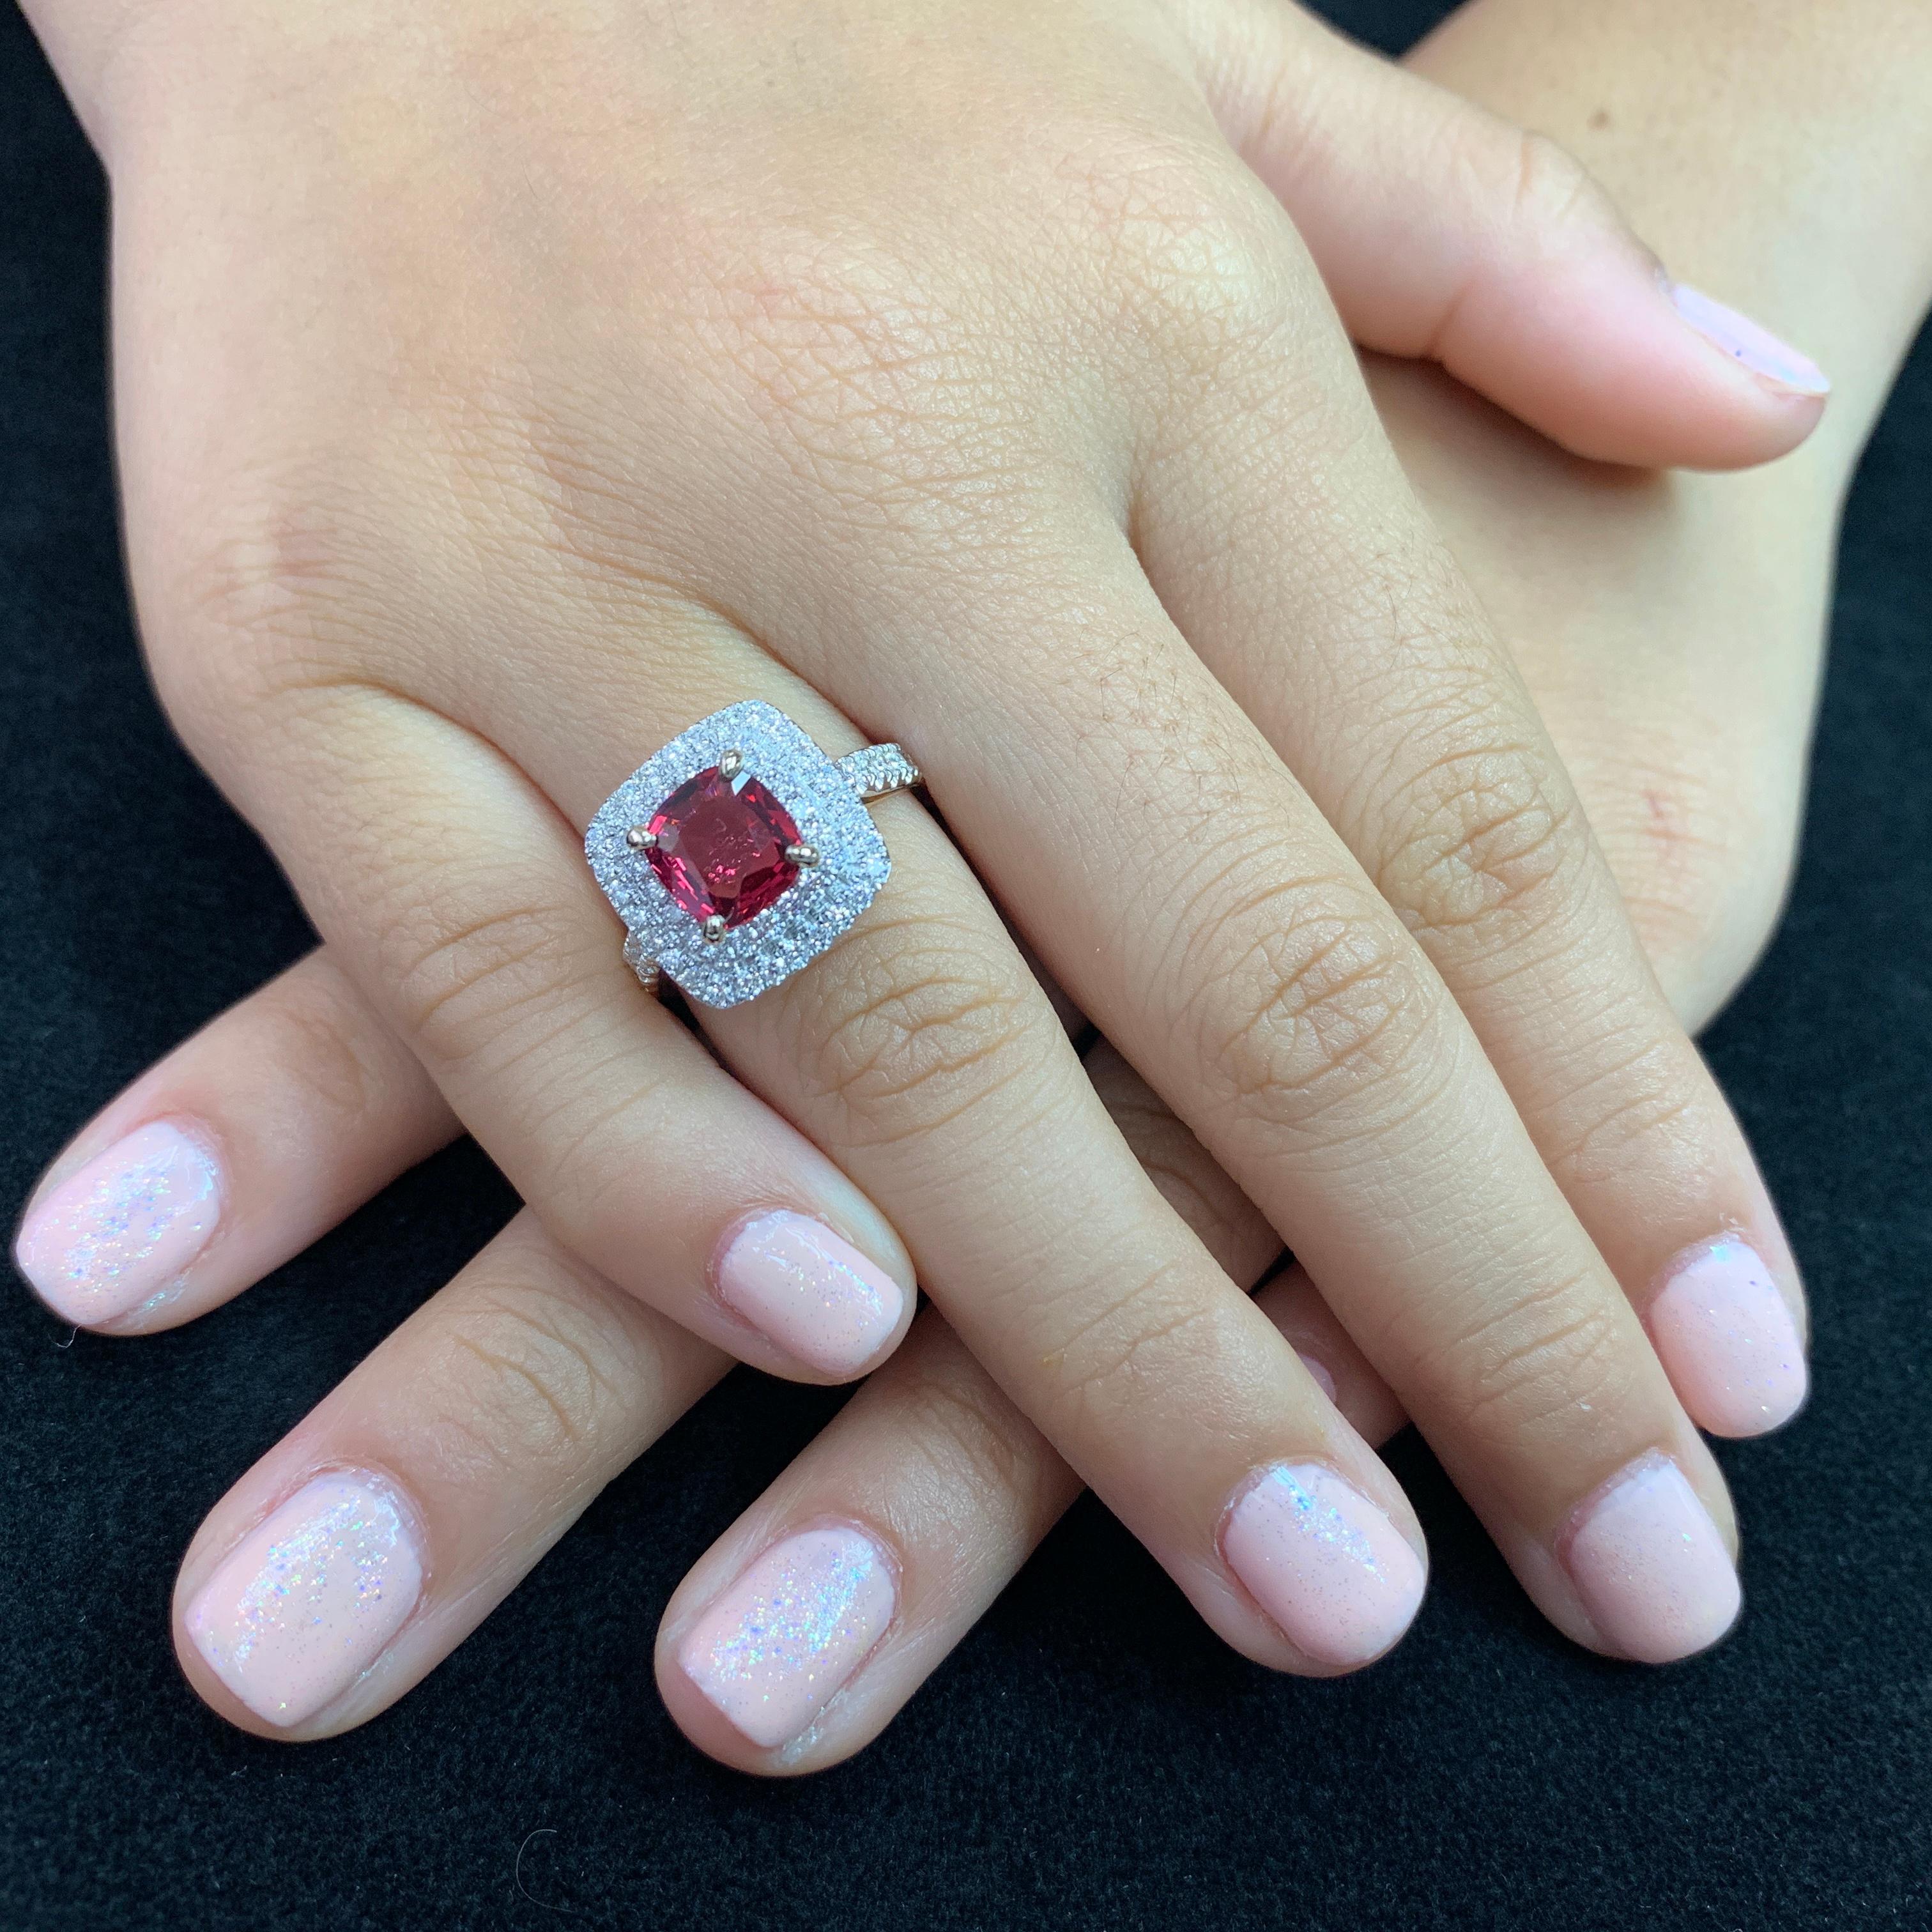 Here is a natural red Spinel and diamond ring. . The ring is set in 18k white gold and rose gold with diamonds. The center red spinel is 1.51 Cts. There are 0.72 carats of diamonds in this two tone setting. . The Spinel is clean and It is full of